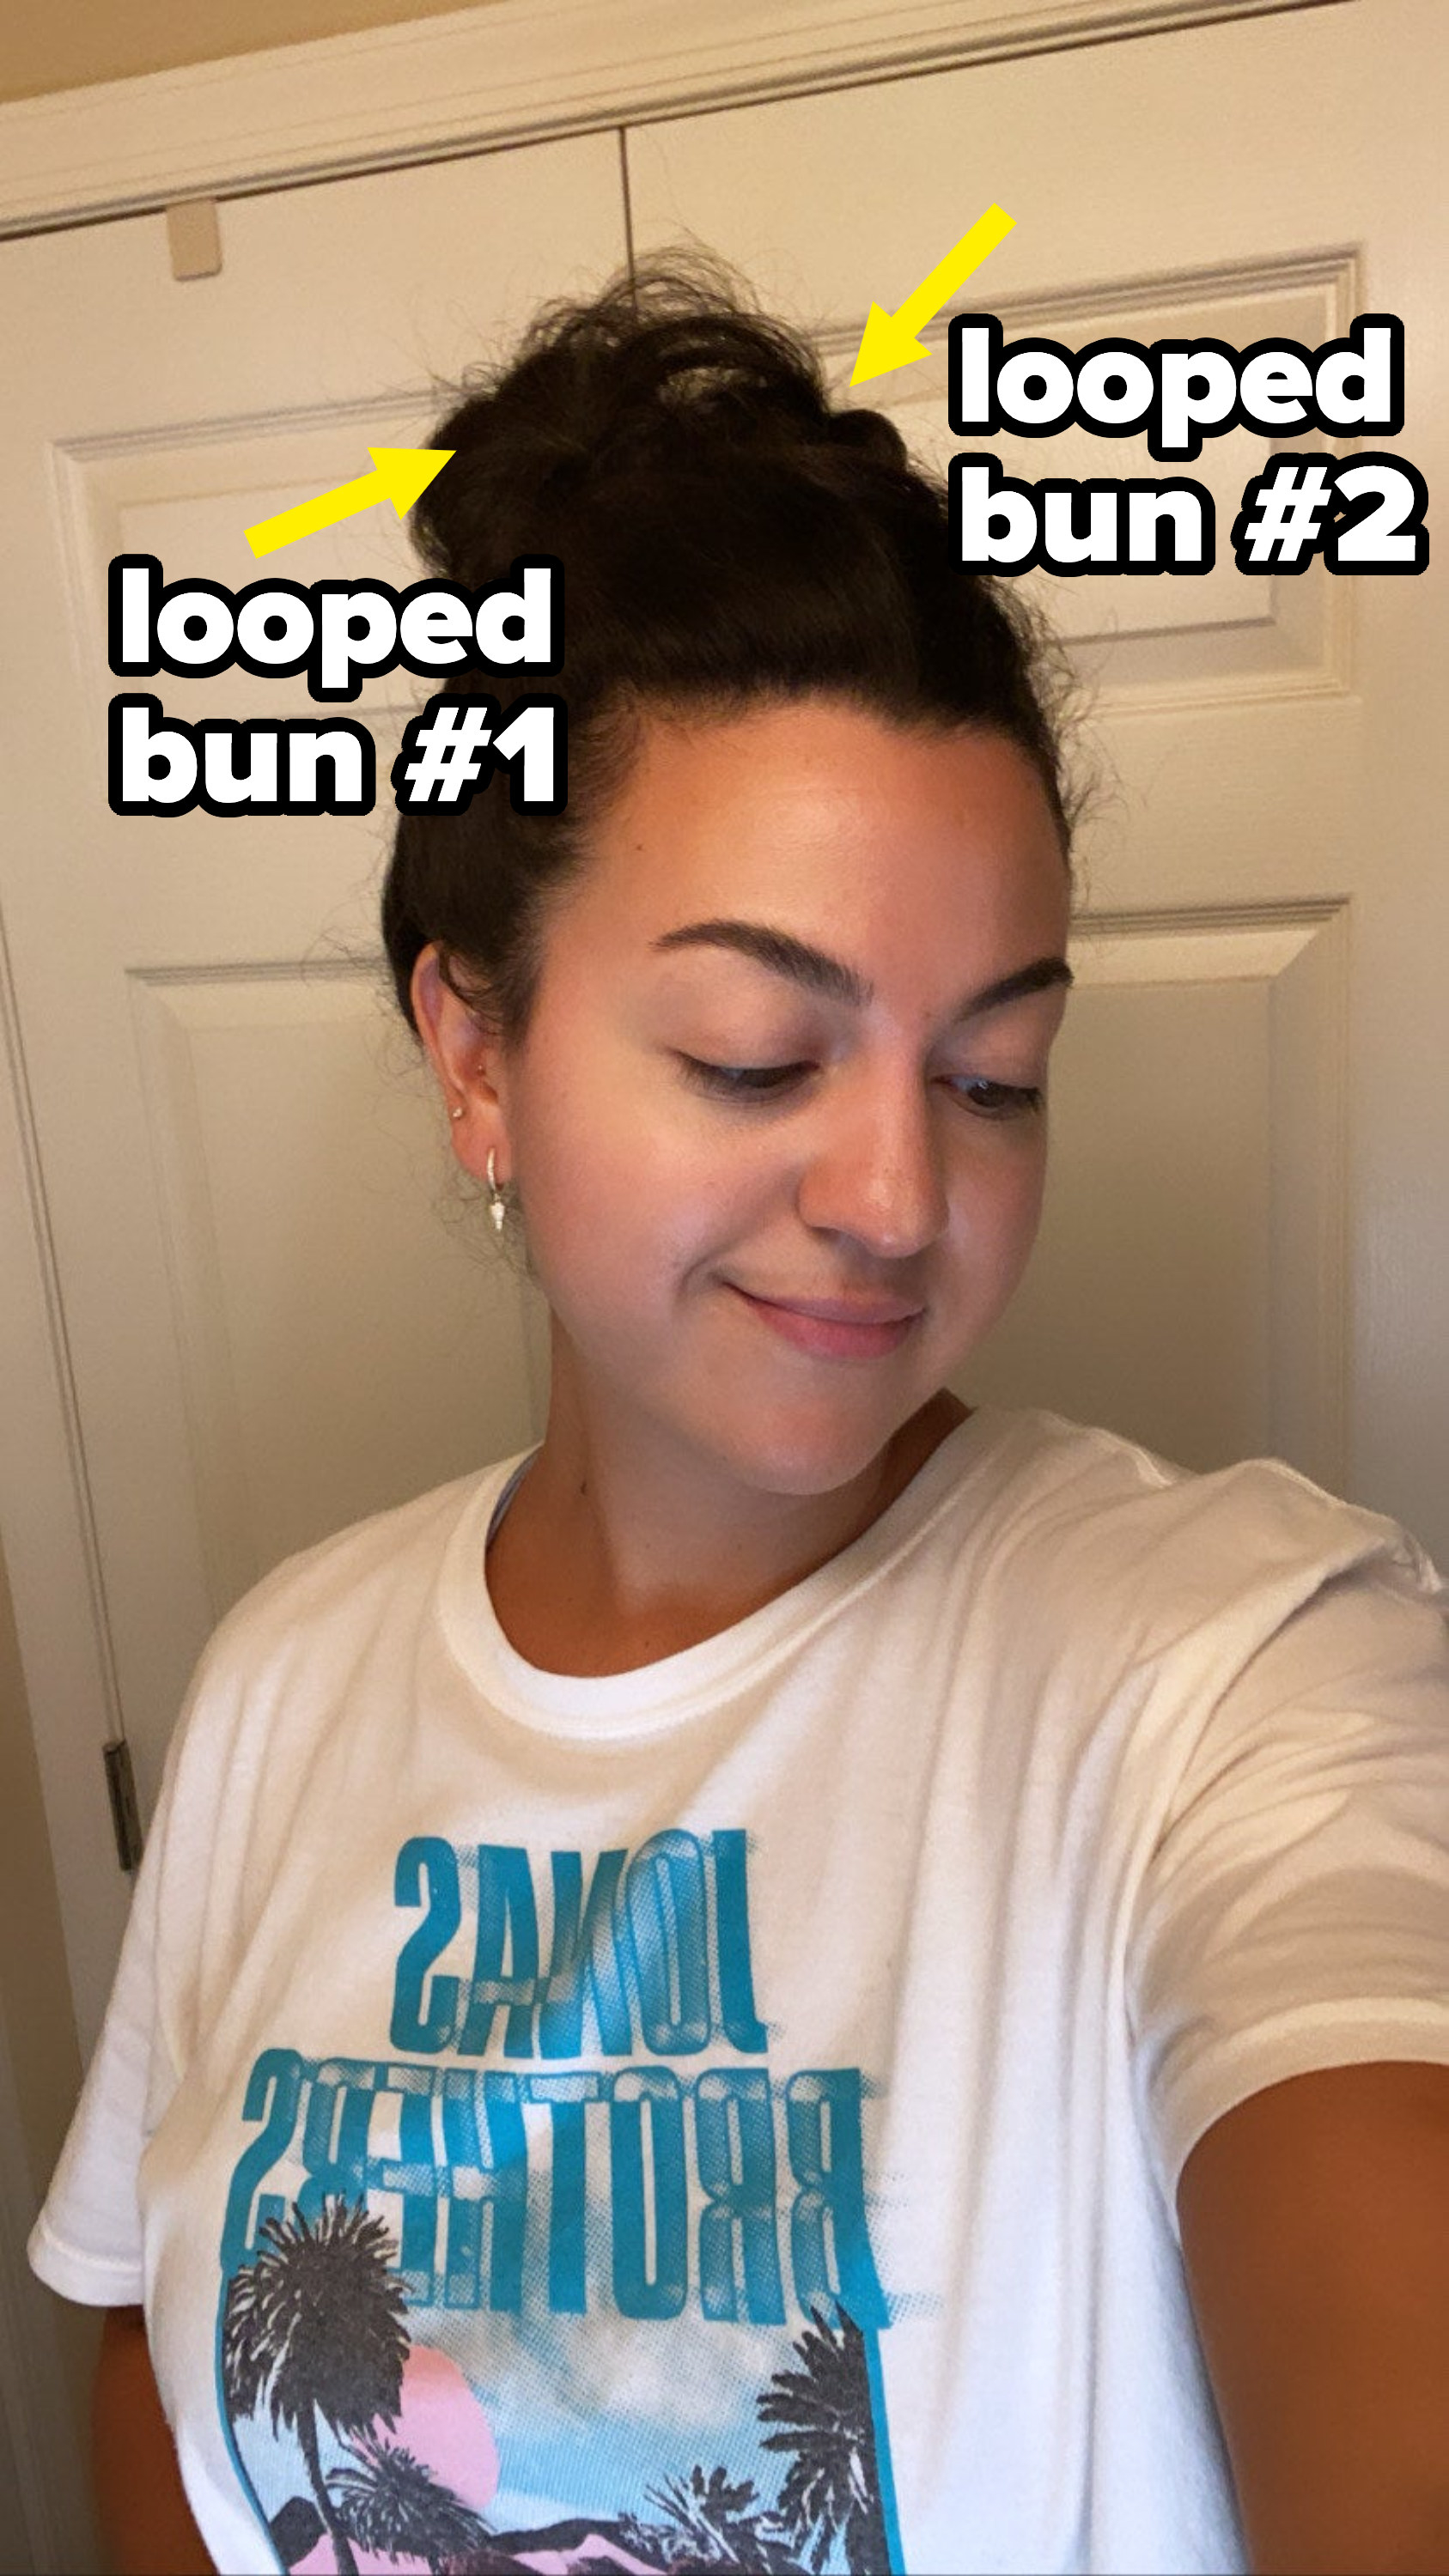 The author trying the bun hair hack